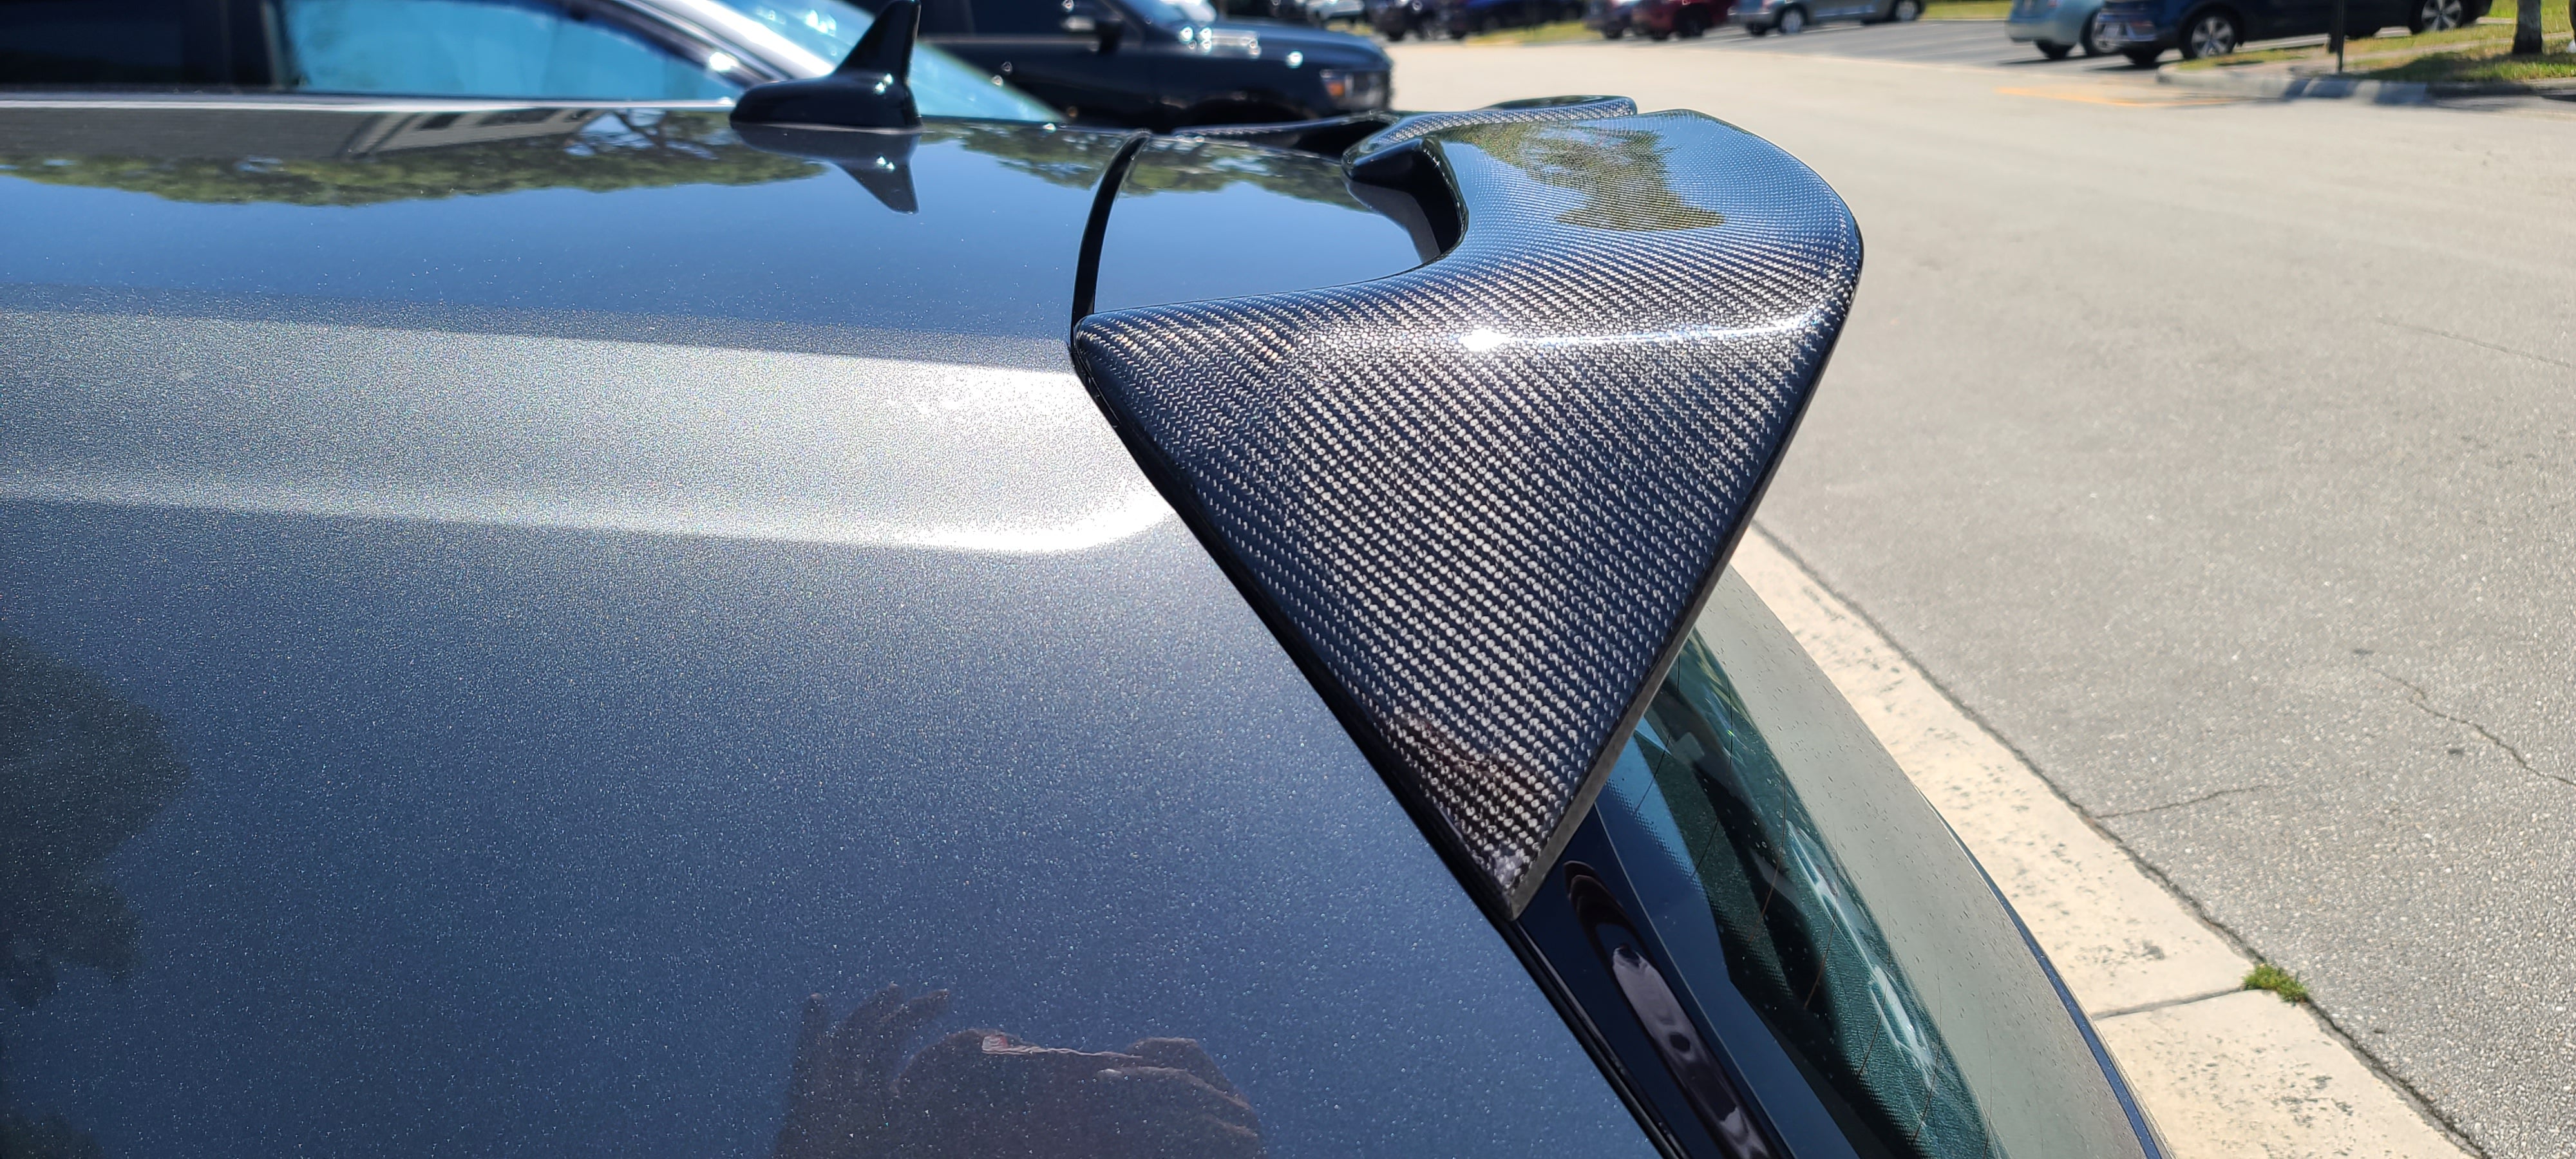 The Benefits of Using Carbon Fiber in Vehicle Manufacturing